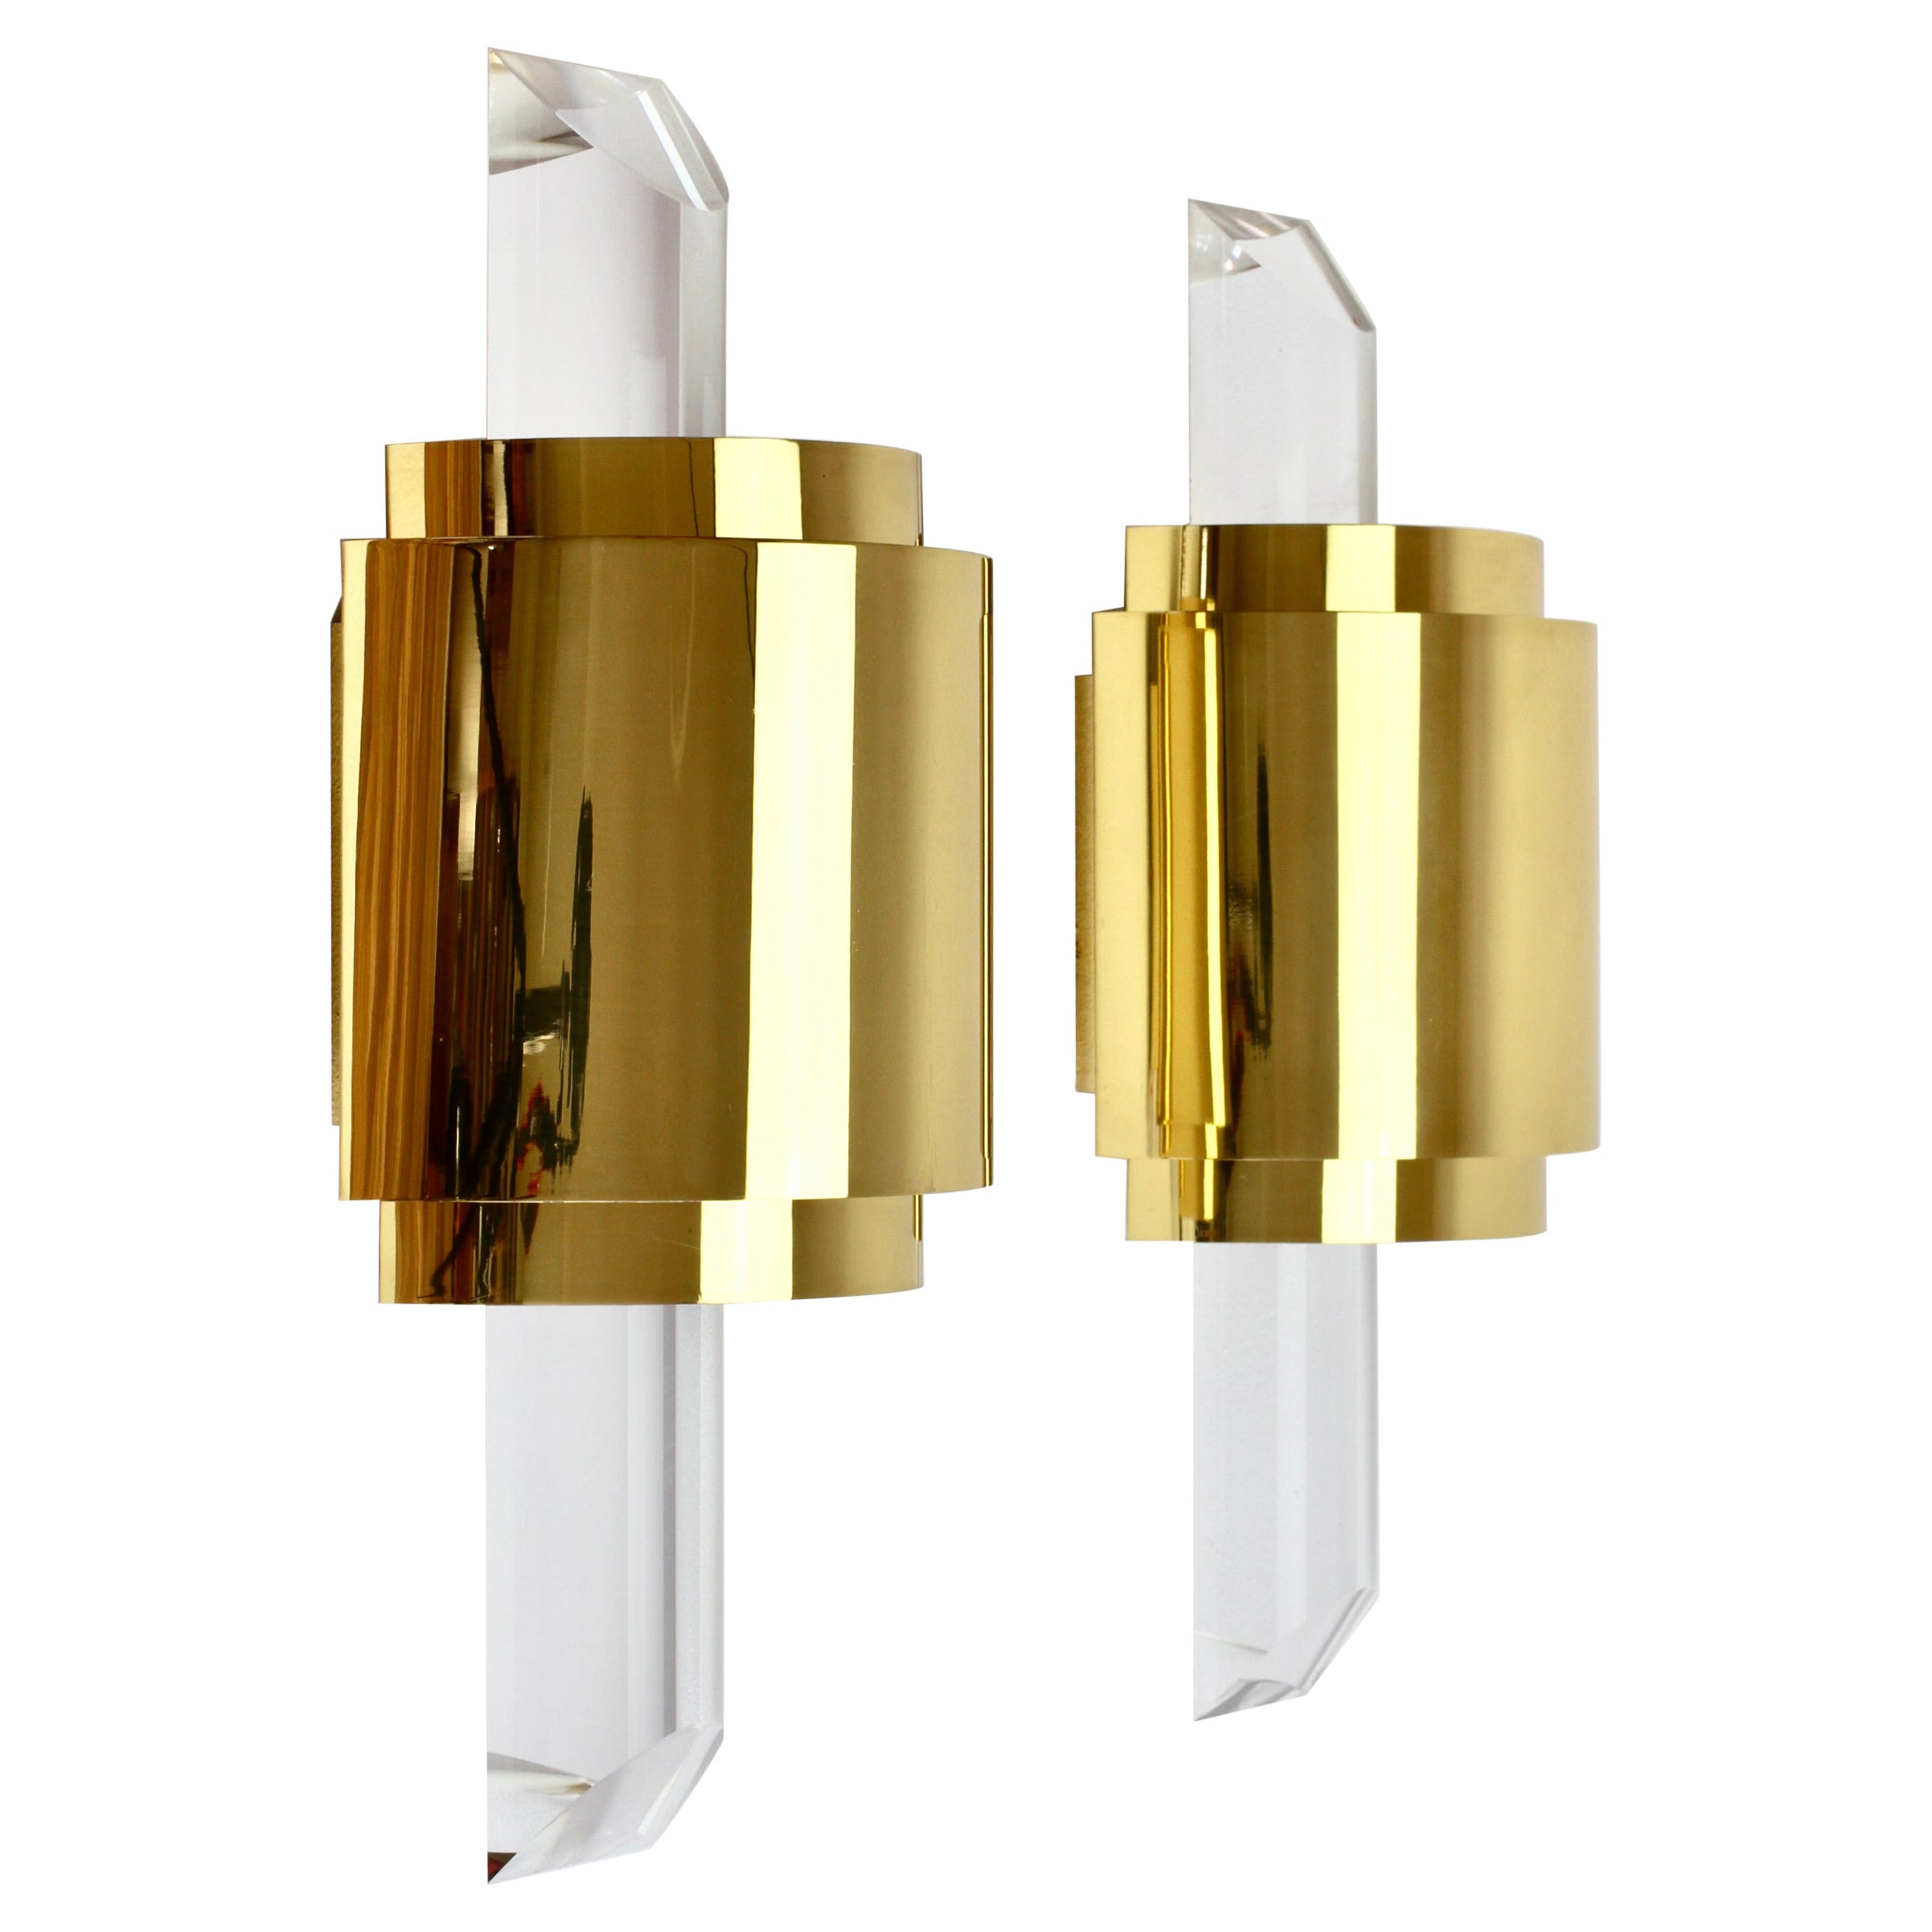 Large Hollywood Regency Lucite and Brass Wall Lights or Sconces, circa 1970s For Sale